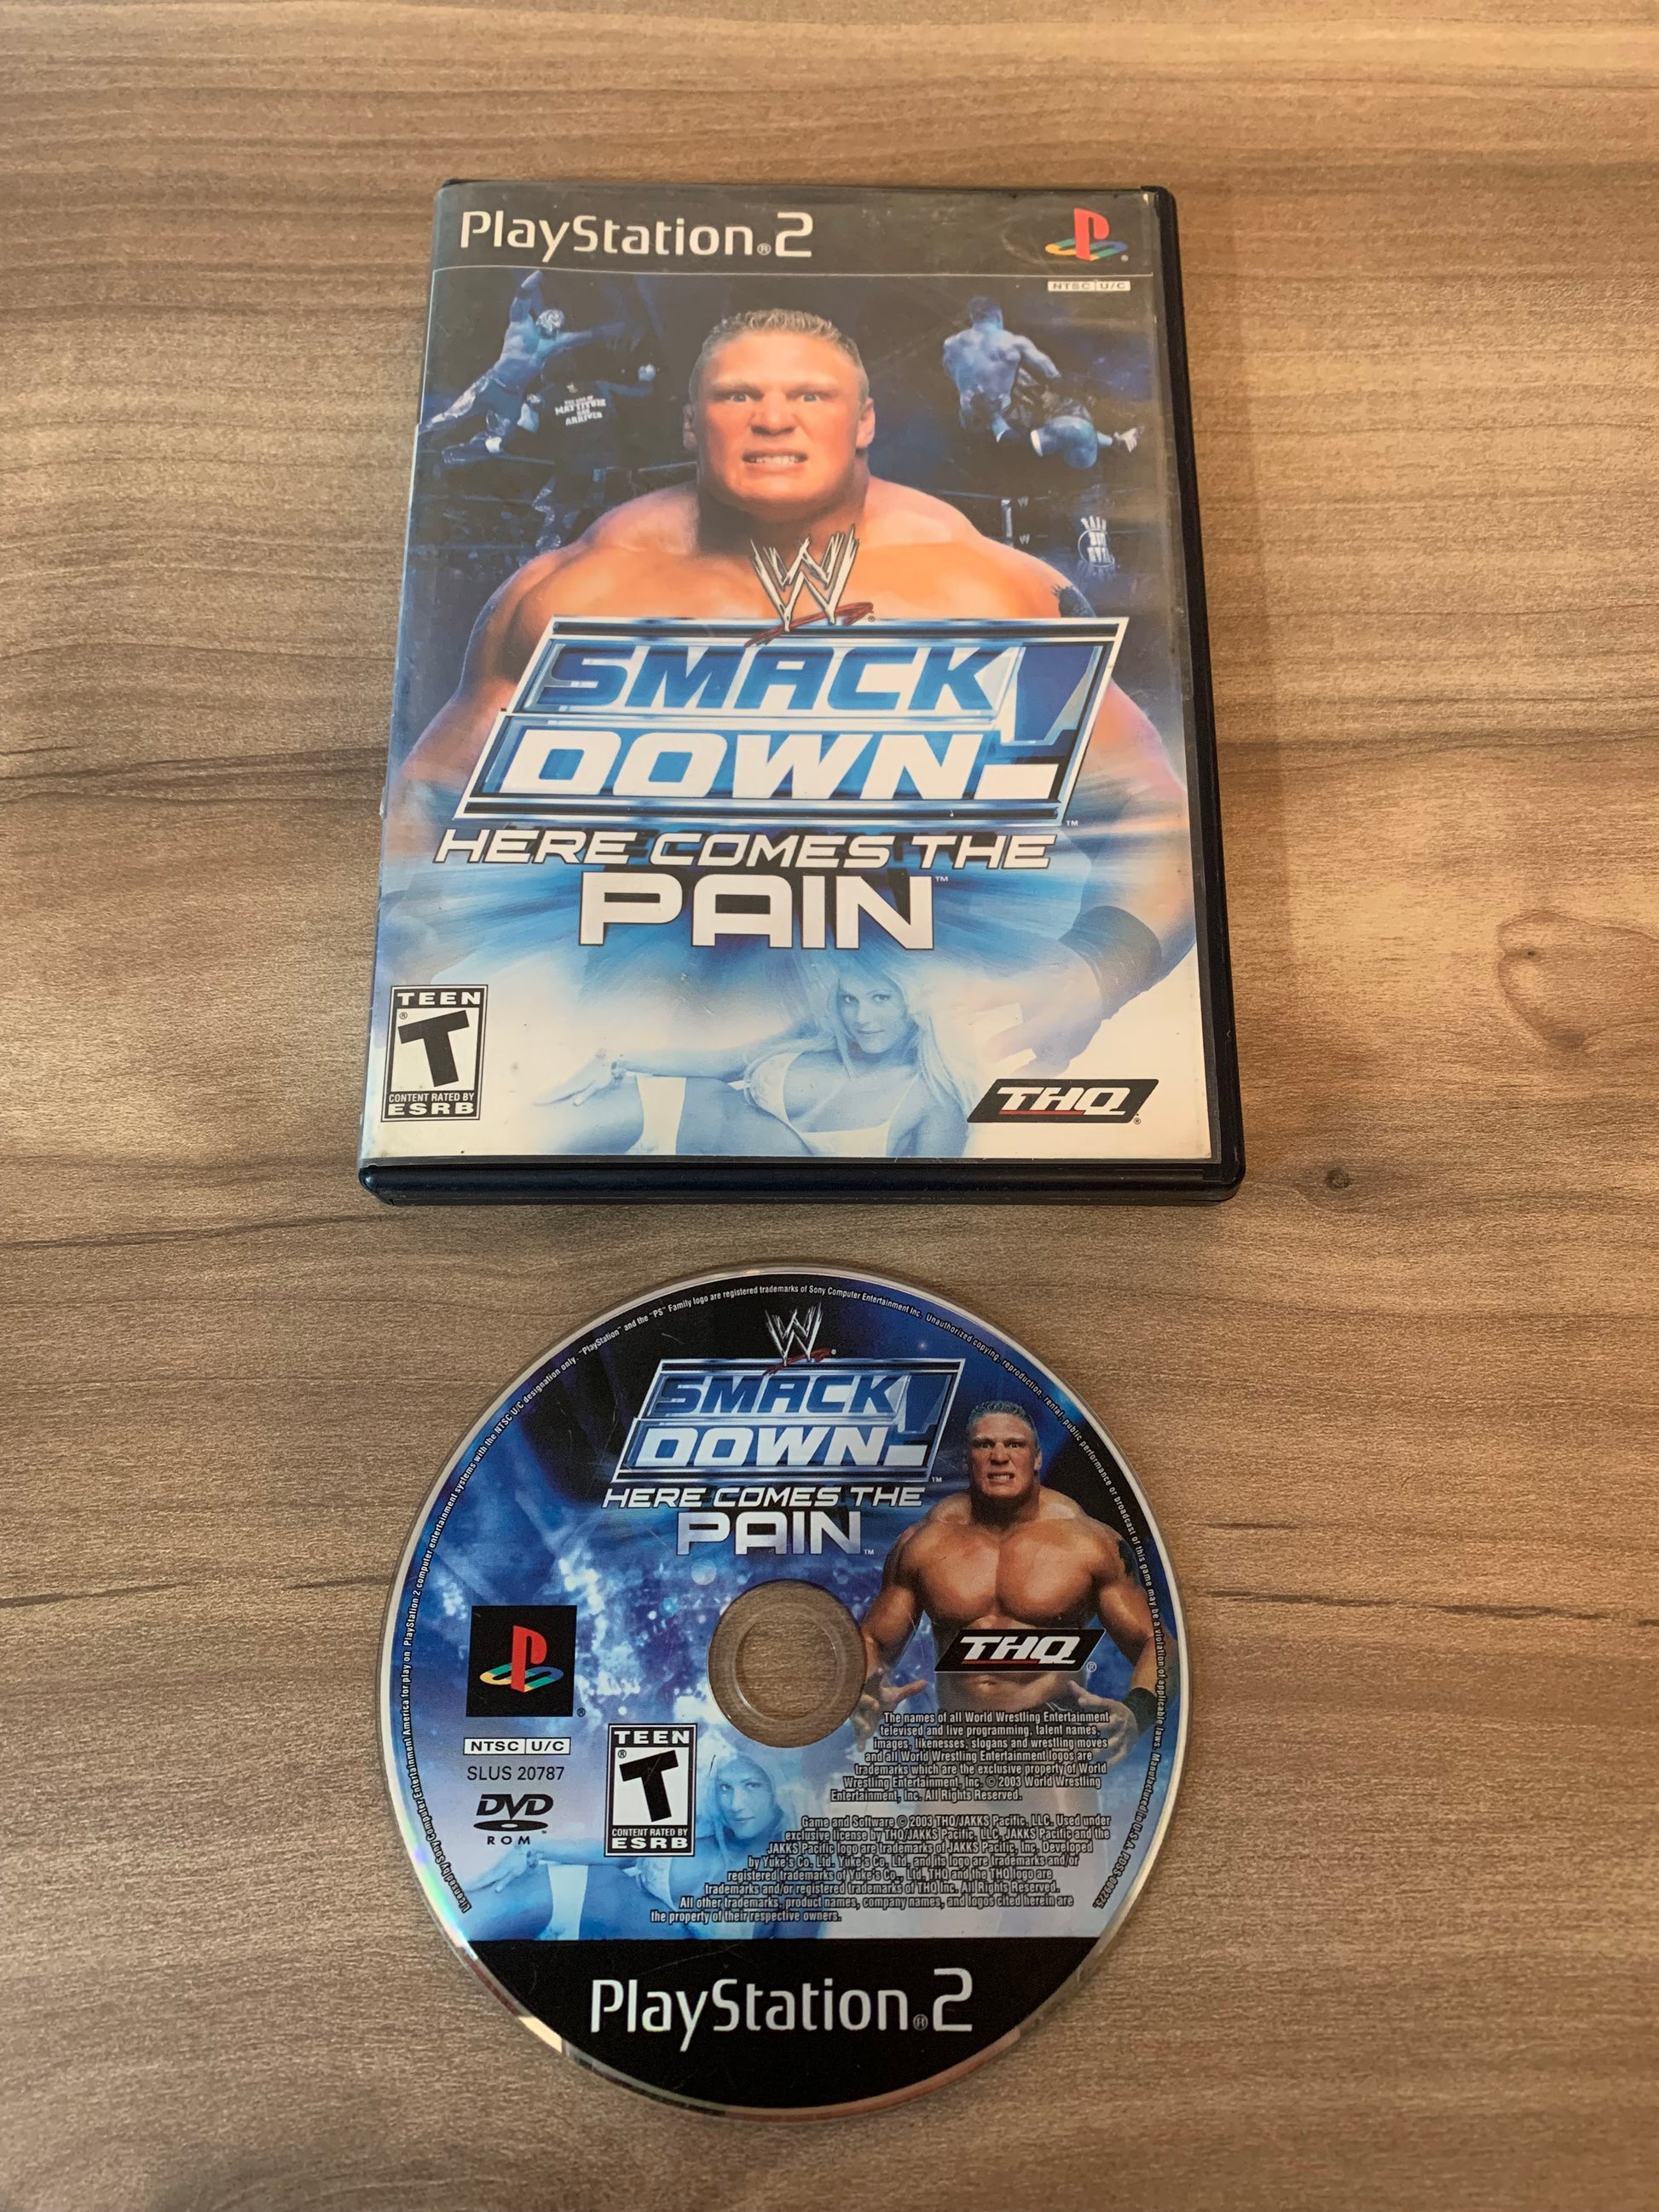 PiXEL-RETRO.COM : SONY PLAYSTATION 2 (PS2) COMPLET CIB BOX MANUAL GAME NTSC WWE SMACKDOWN HERE COMES THE PAIN